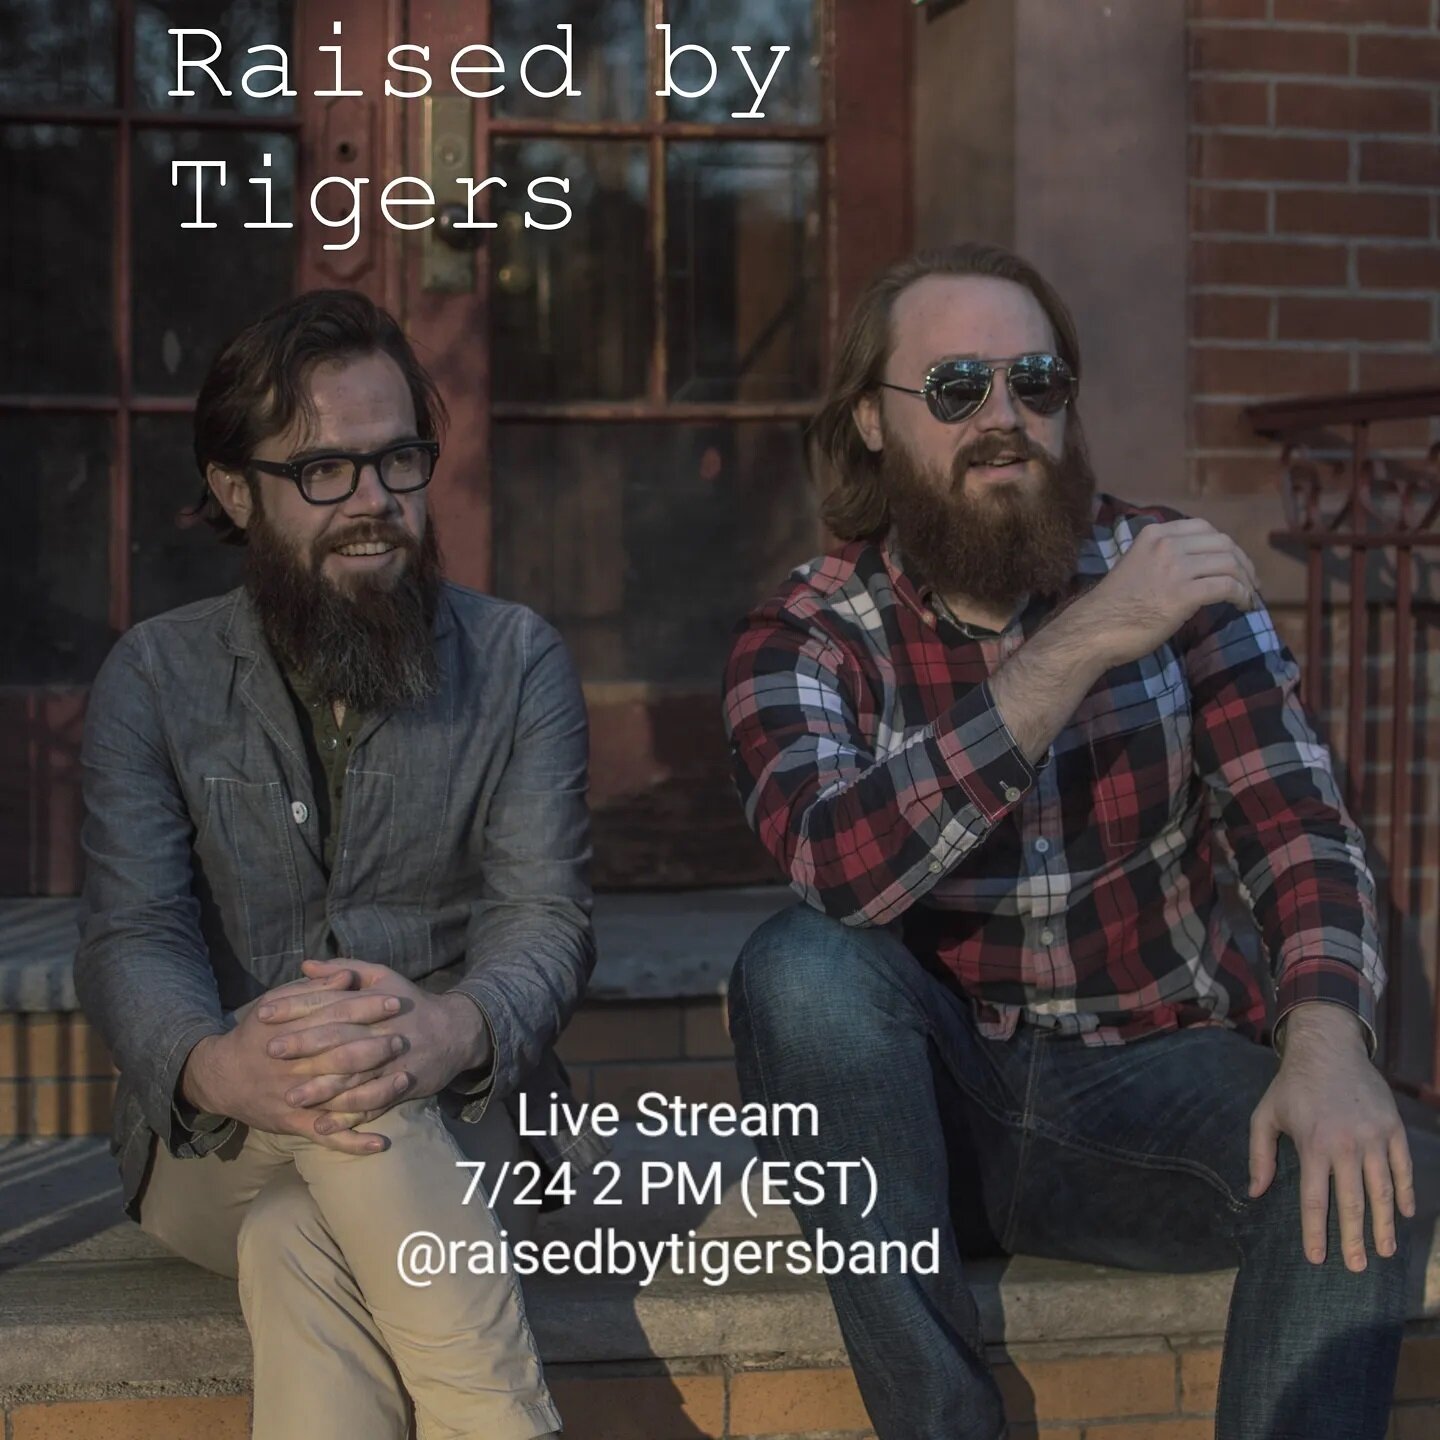 Impromptu live stream tomorrow afternoon 7/24 2pm EST. Join Andrew and James for some good tunes!

#raisedbytigers #livestream #duo #nycmusic #acoustic #unplugged